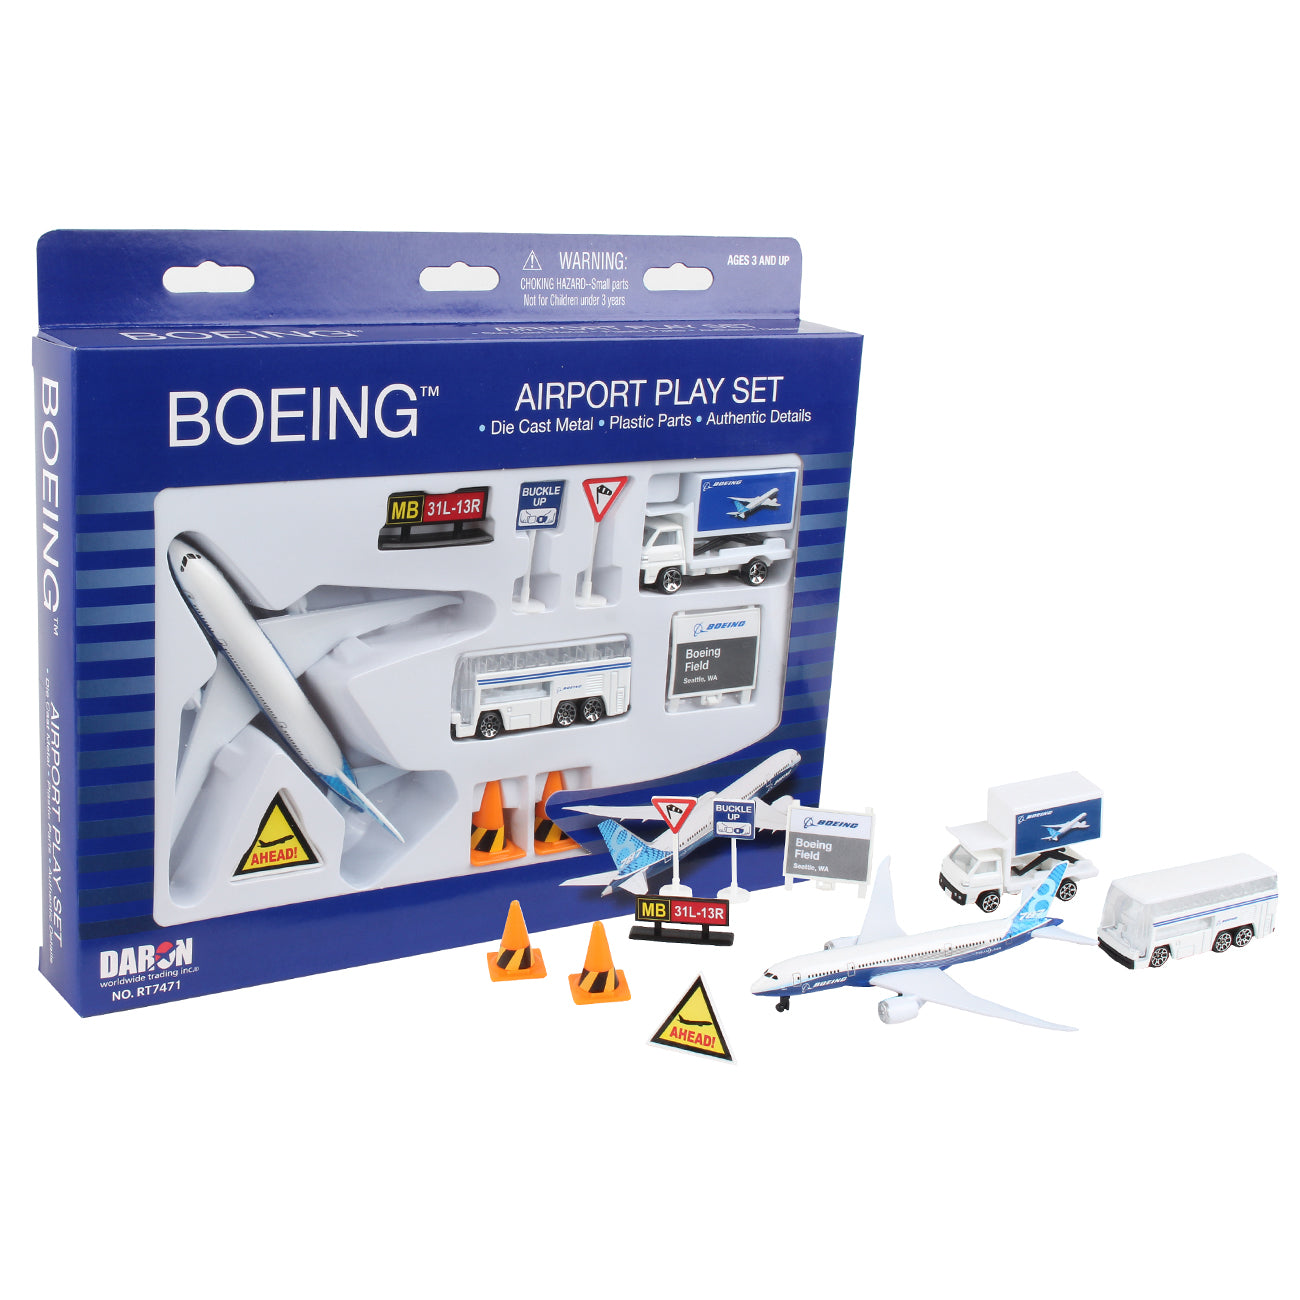 Boeing Airport Play set (New)